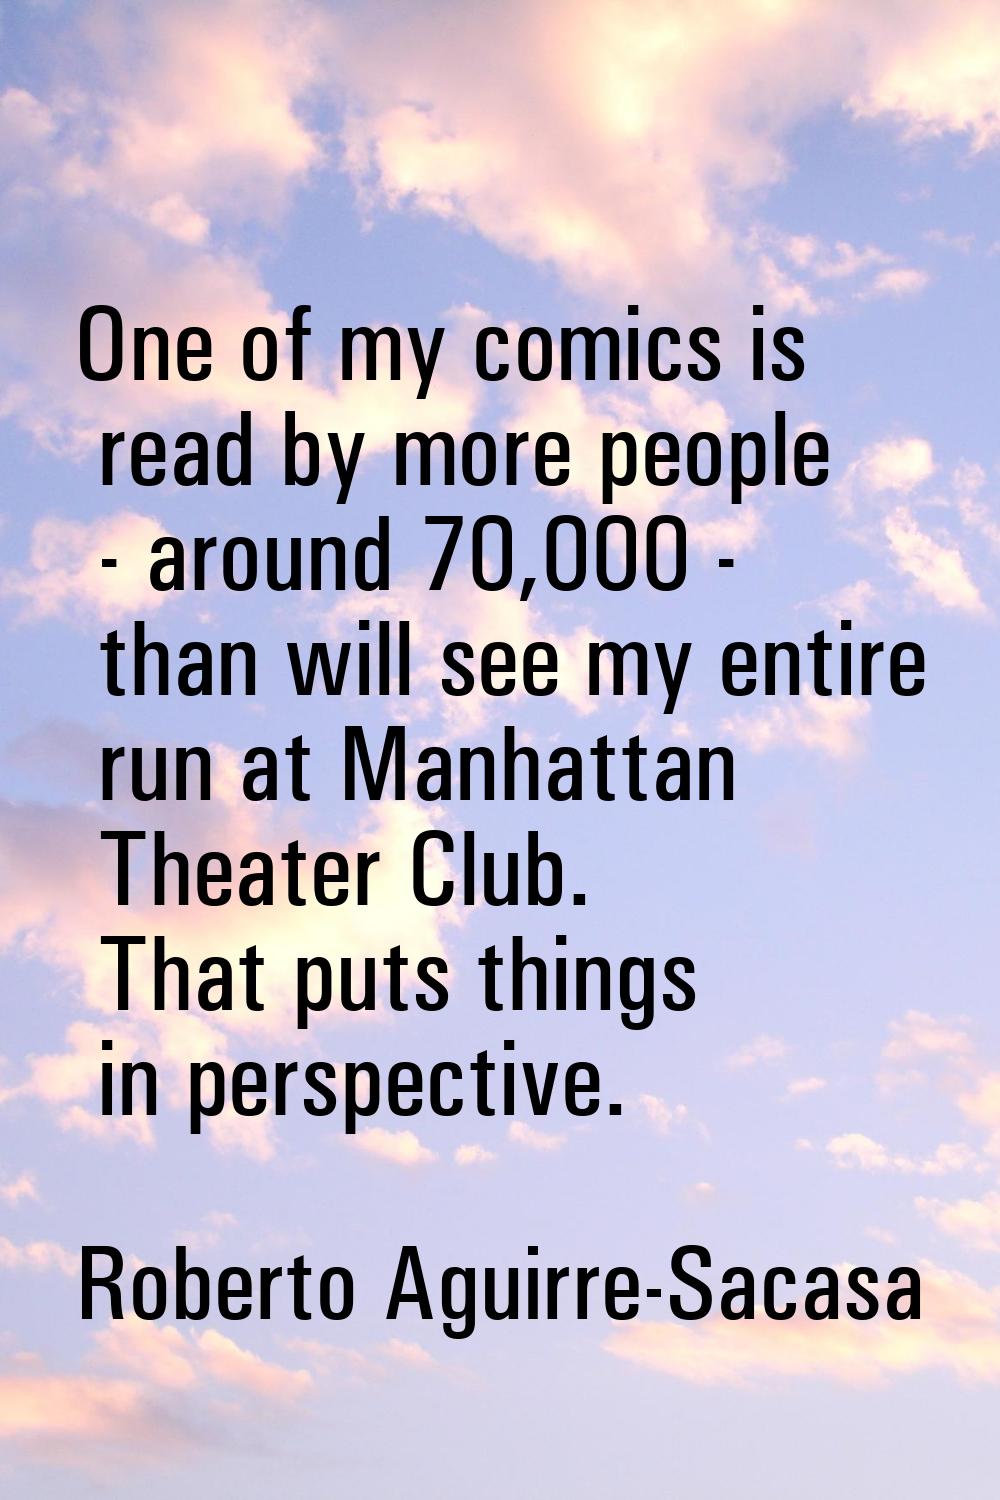 One of my comics is read by more people - around 70,000 - than will see my entire run at Manhattan 